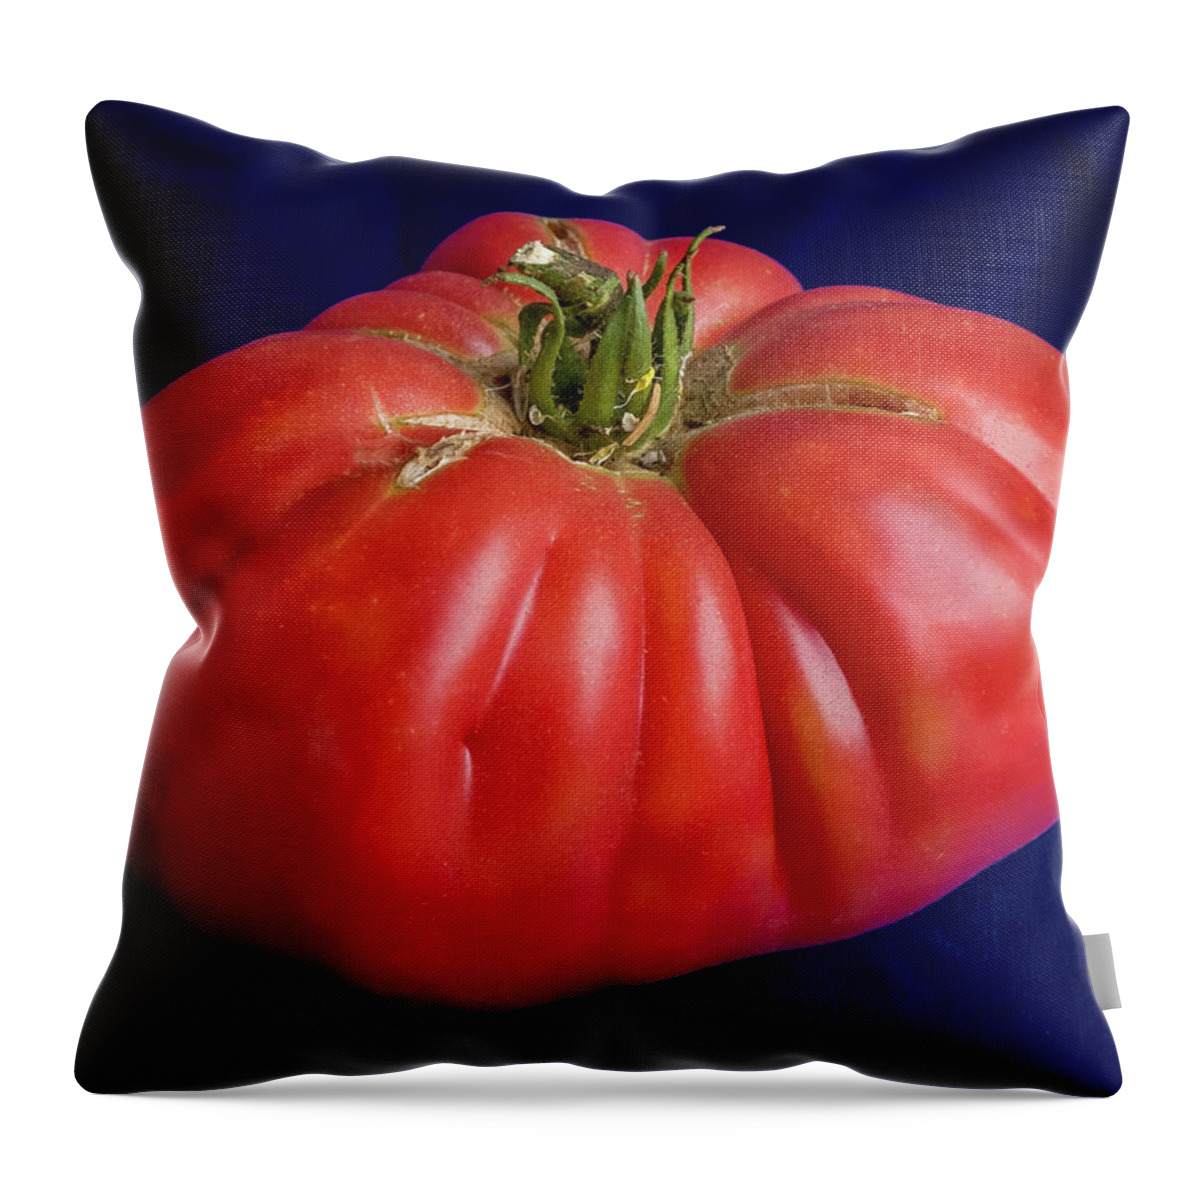 Heirloom Tomato Throw Pillow featuring the photograph Heirloom Tomato by Kathy Anselmo